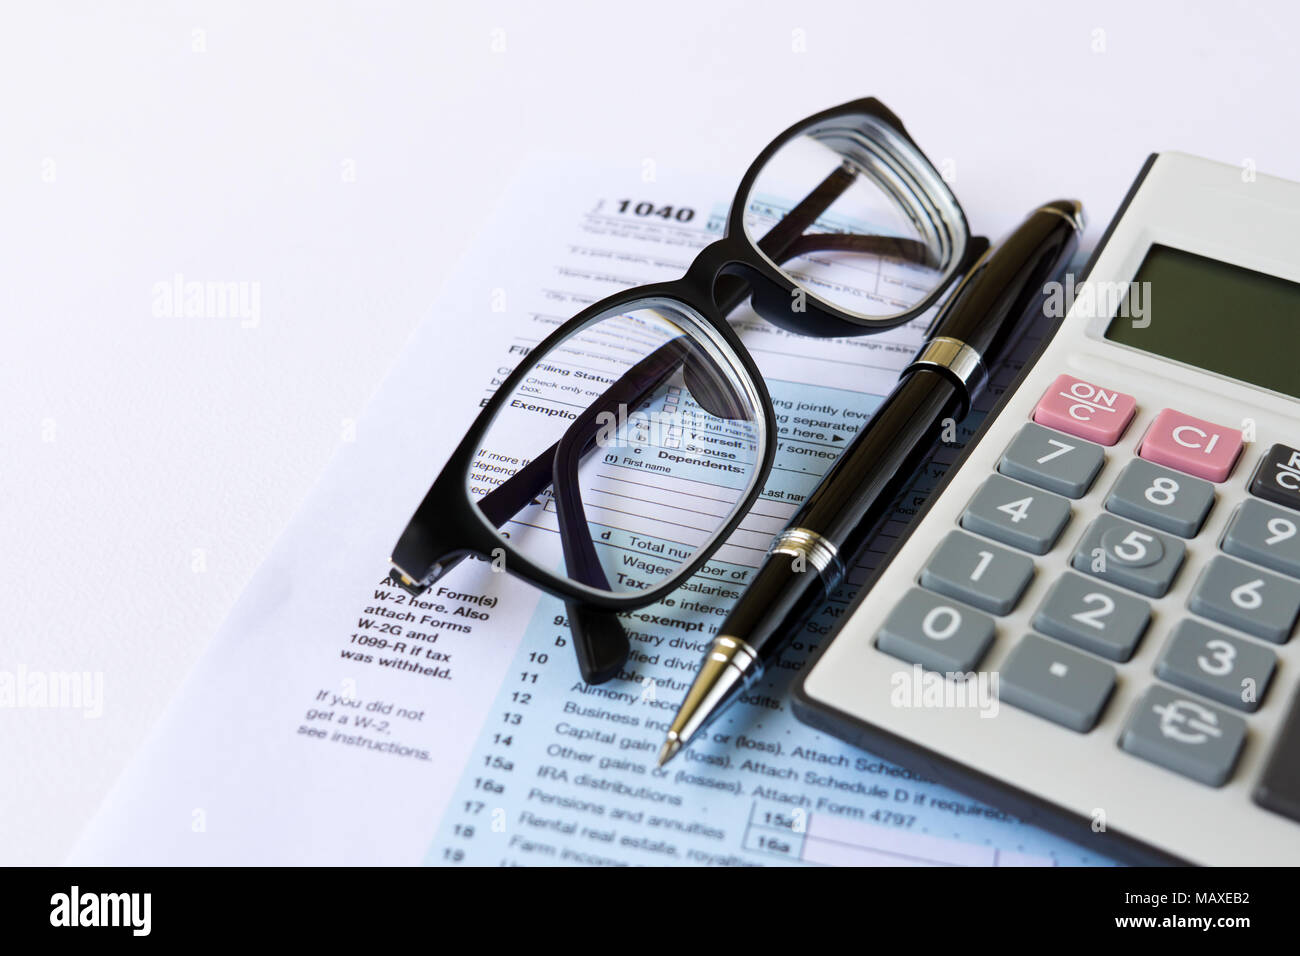 Tax filing - Top view of calculator, pen, eyeglasses and out of focus U.S IRS 1040 form Stock Photo